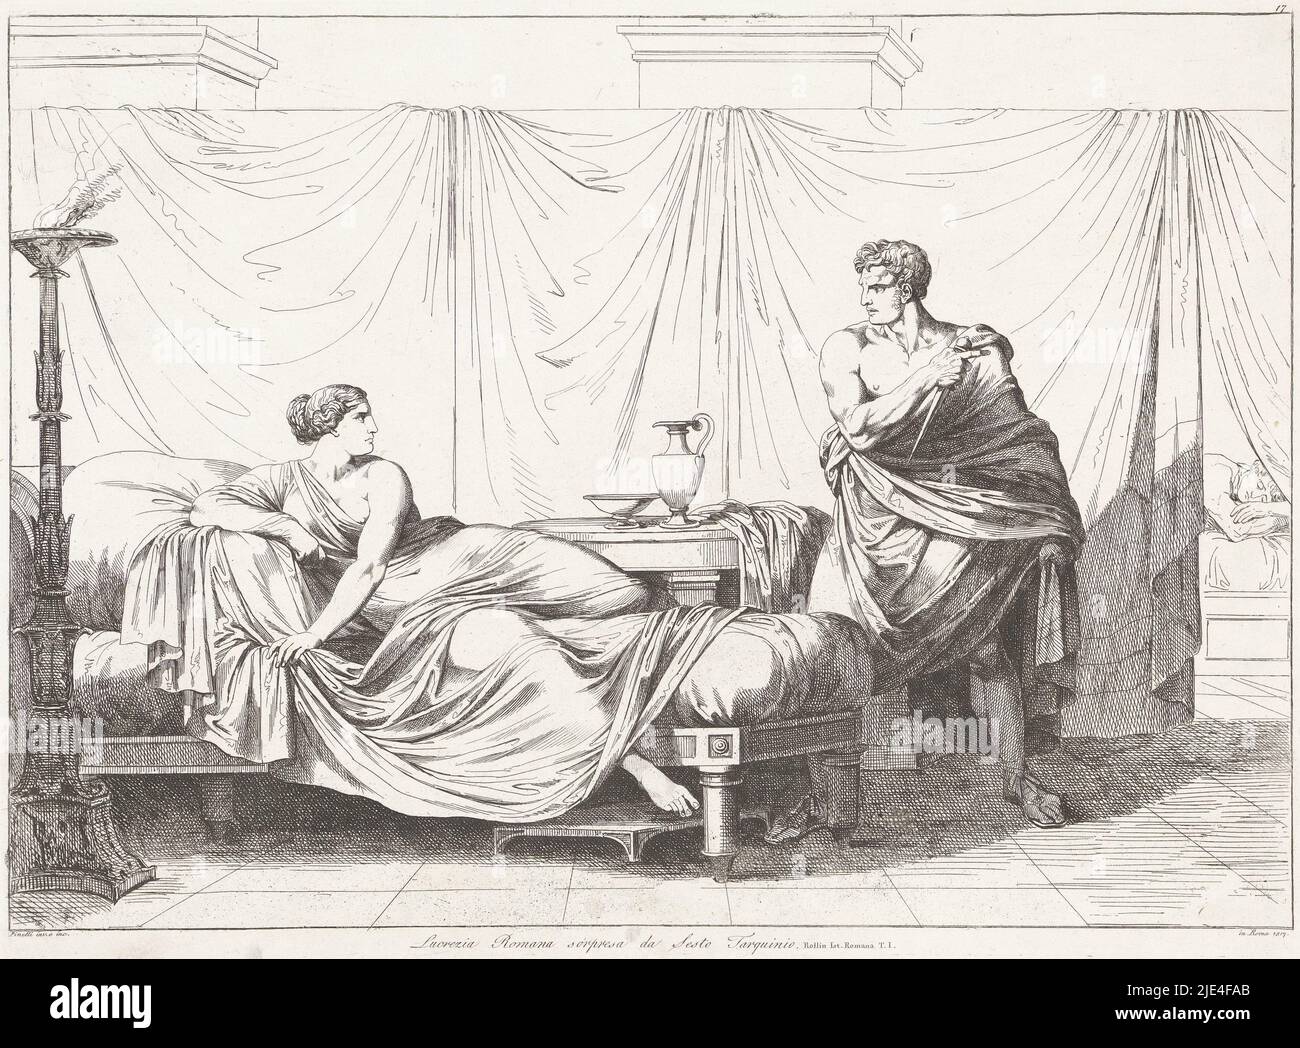 Lucretia and Sextus Tarquinius, Bartolomeo Pinelli, 1818, Lucretia lies on her bed. She is surprised by Sextus Tarquinius who steps into her room with a dagger in his hand. He threatens to kill her if she does not give herself to him., print maker: Bartolomeo Pinelli, (mentioned on object), Bartolomeo Pinelli, (mentioned on object), Rome, 1818, paper, etching, h 316 mm × w 425 mm Stock Photo